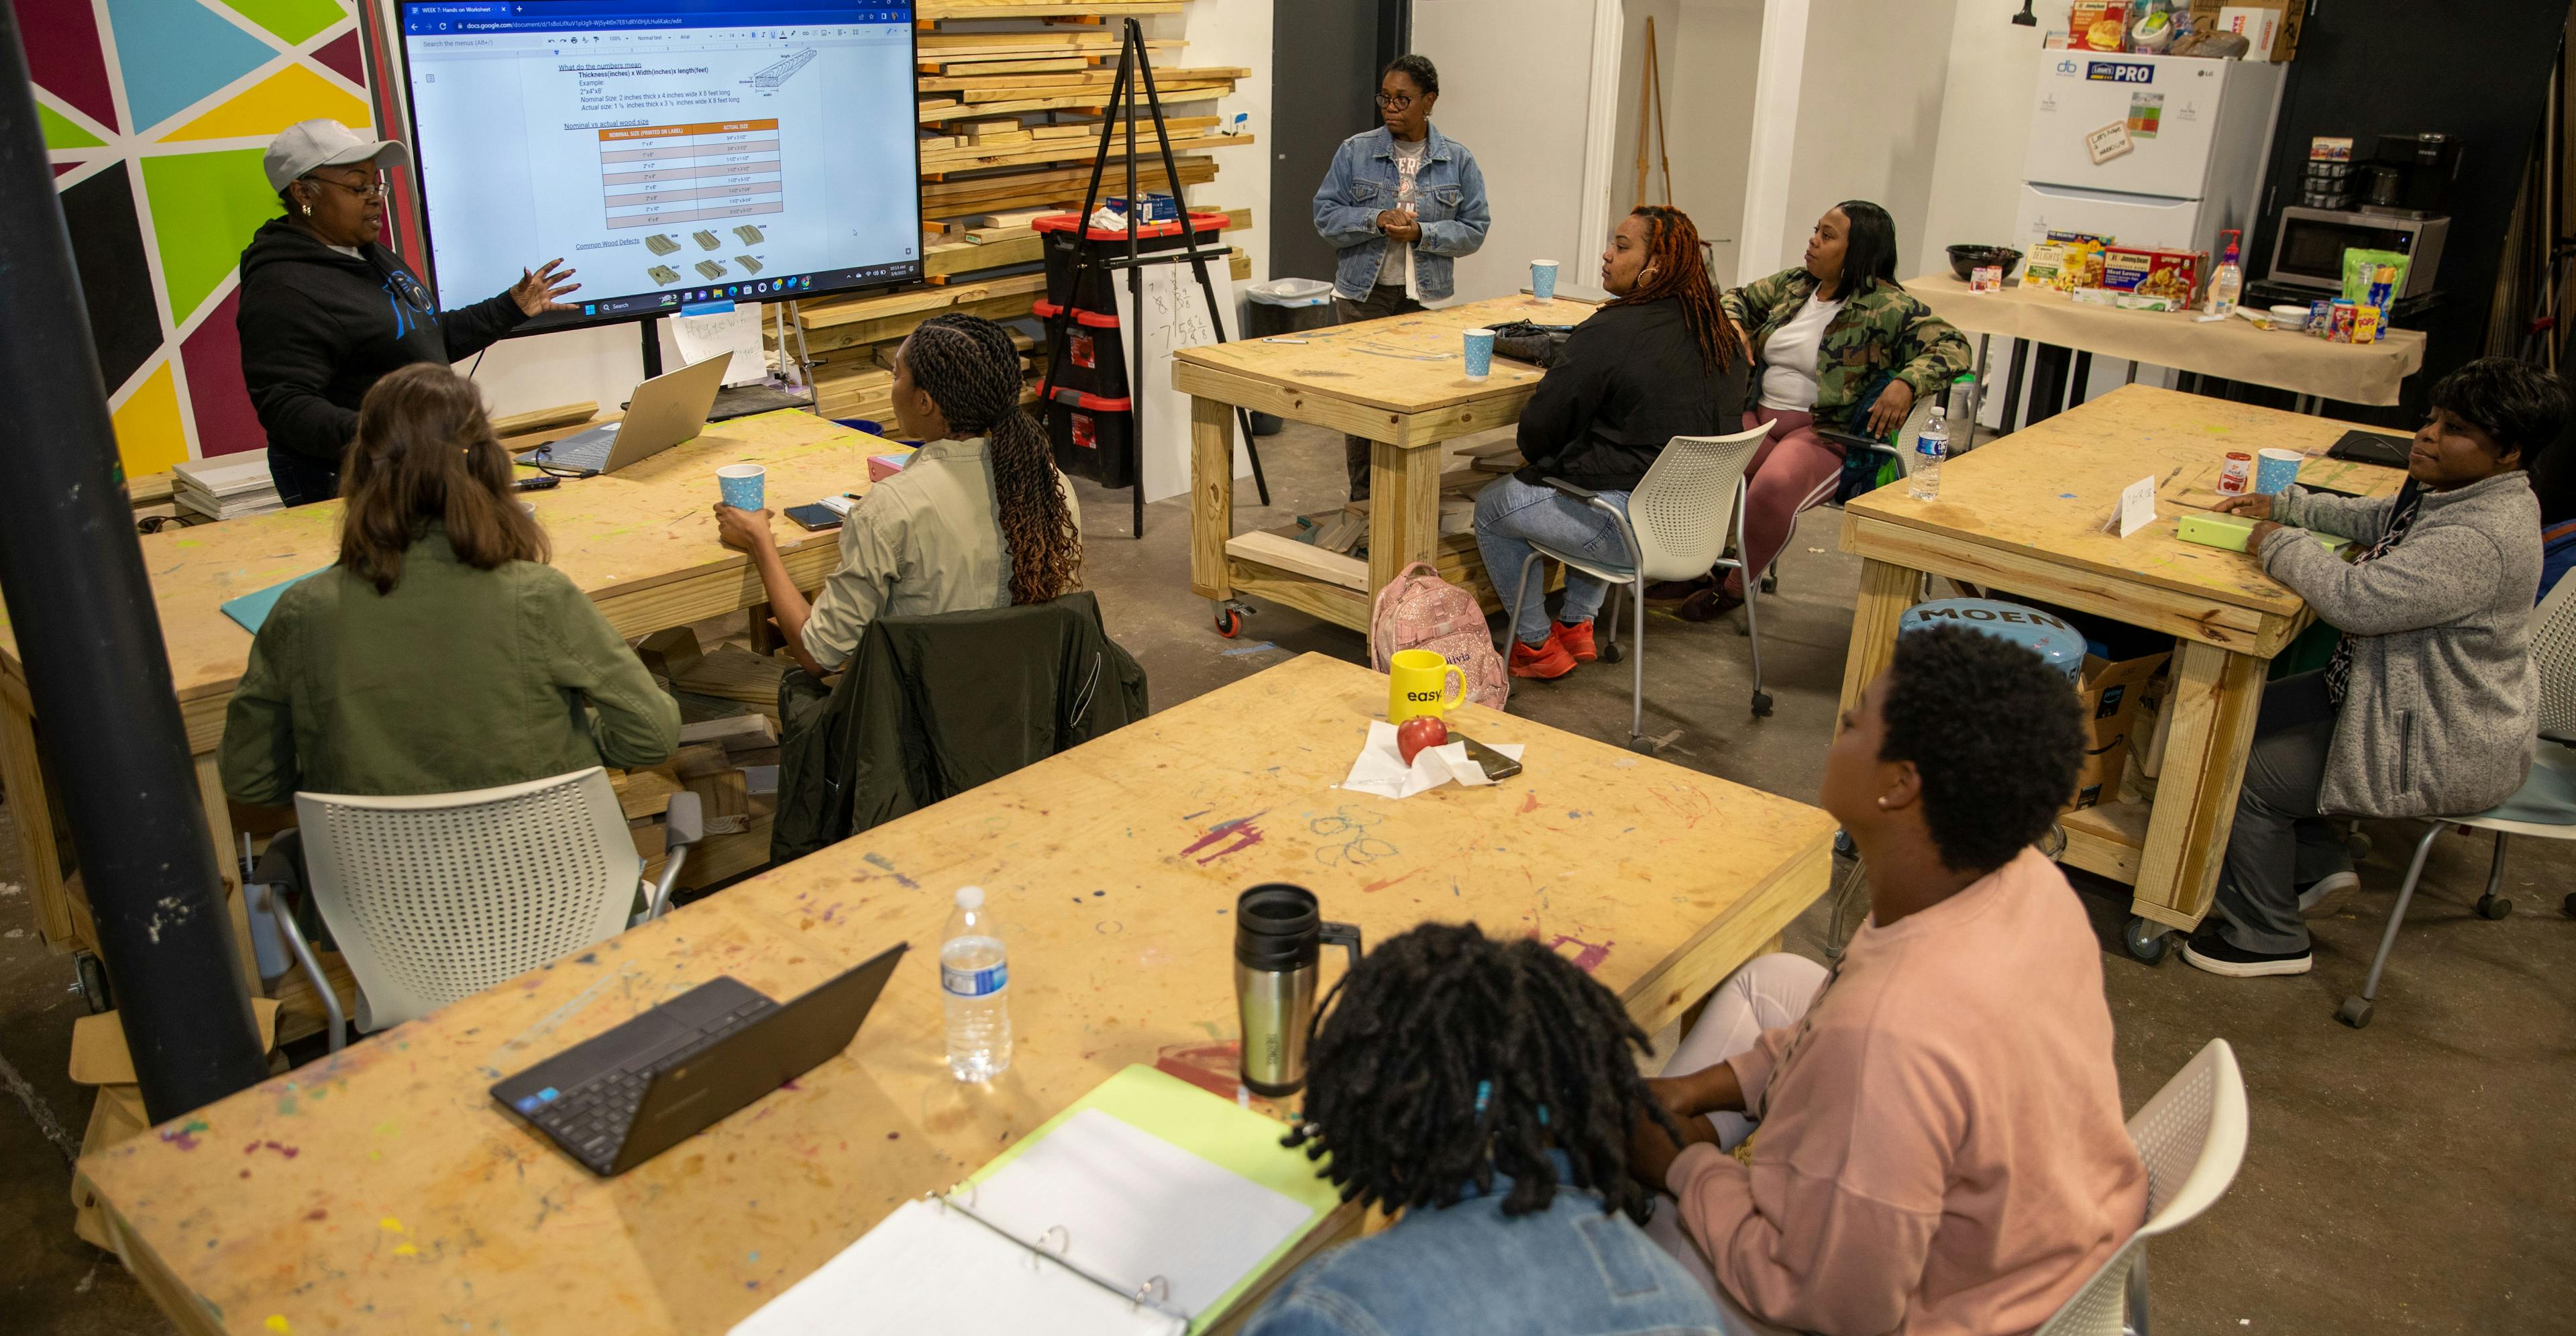 A training session from She Built This City, a Charlotte-based nonprofit that provides training and employment opportunities in the skilled trades. Lowe’s and the Lowe’s Foundation have provided funding support to She Built This City